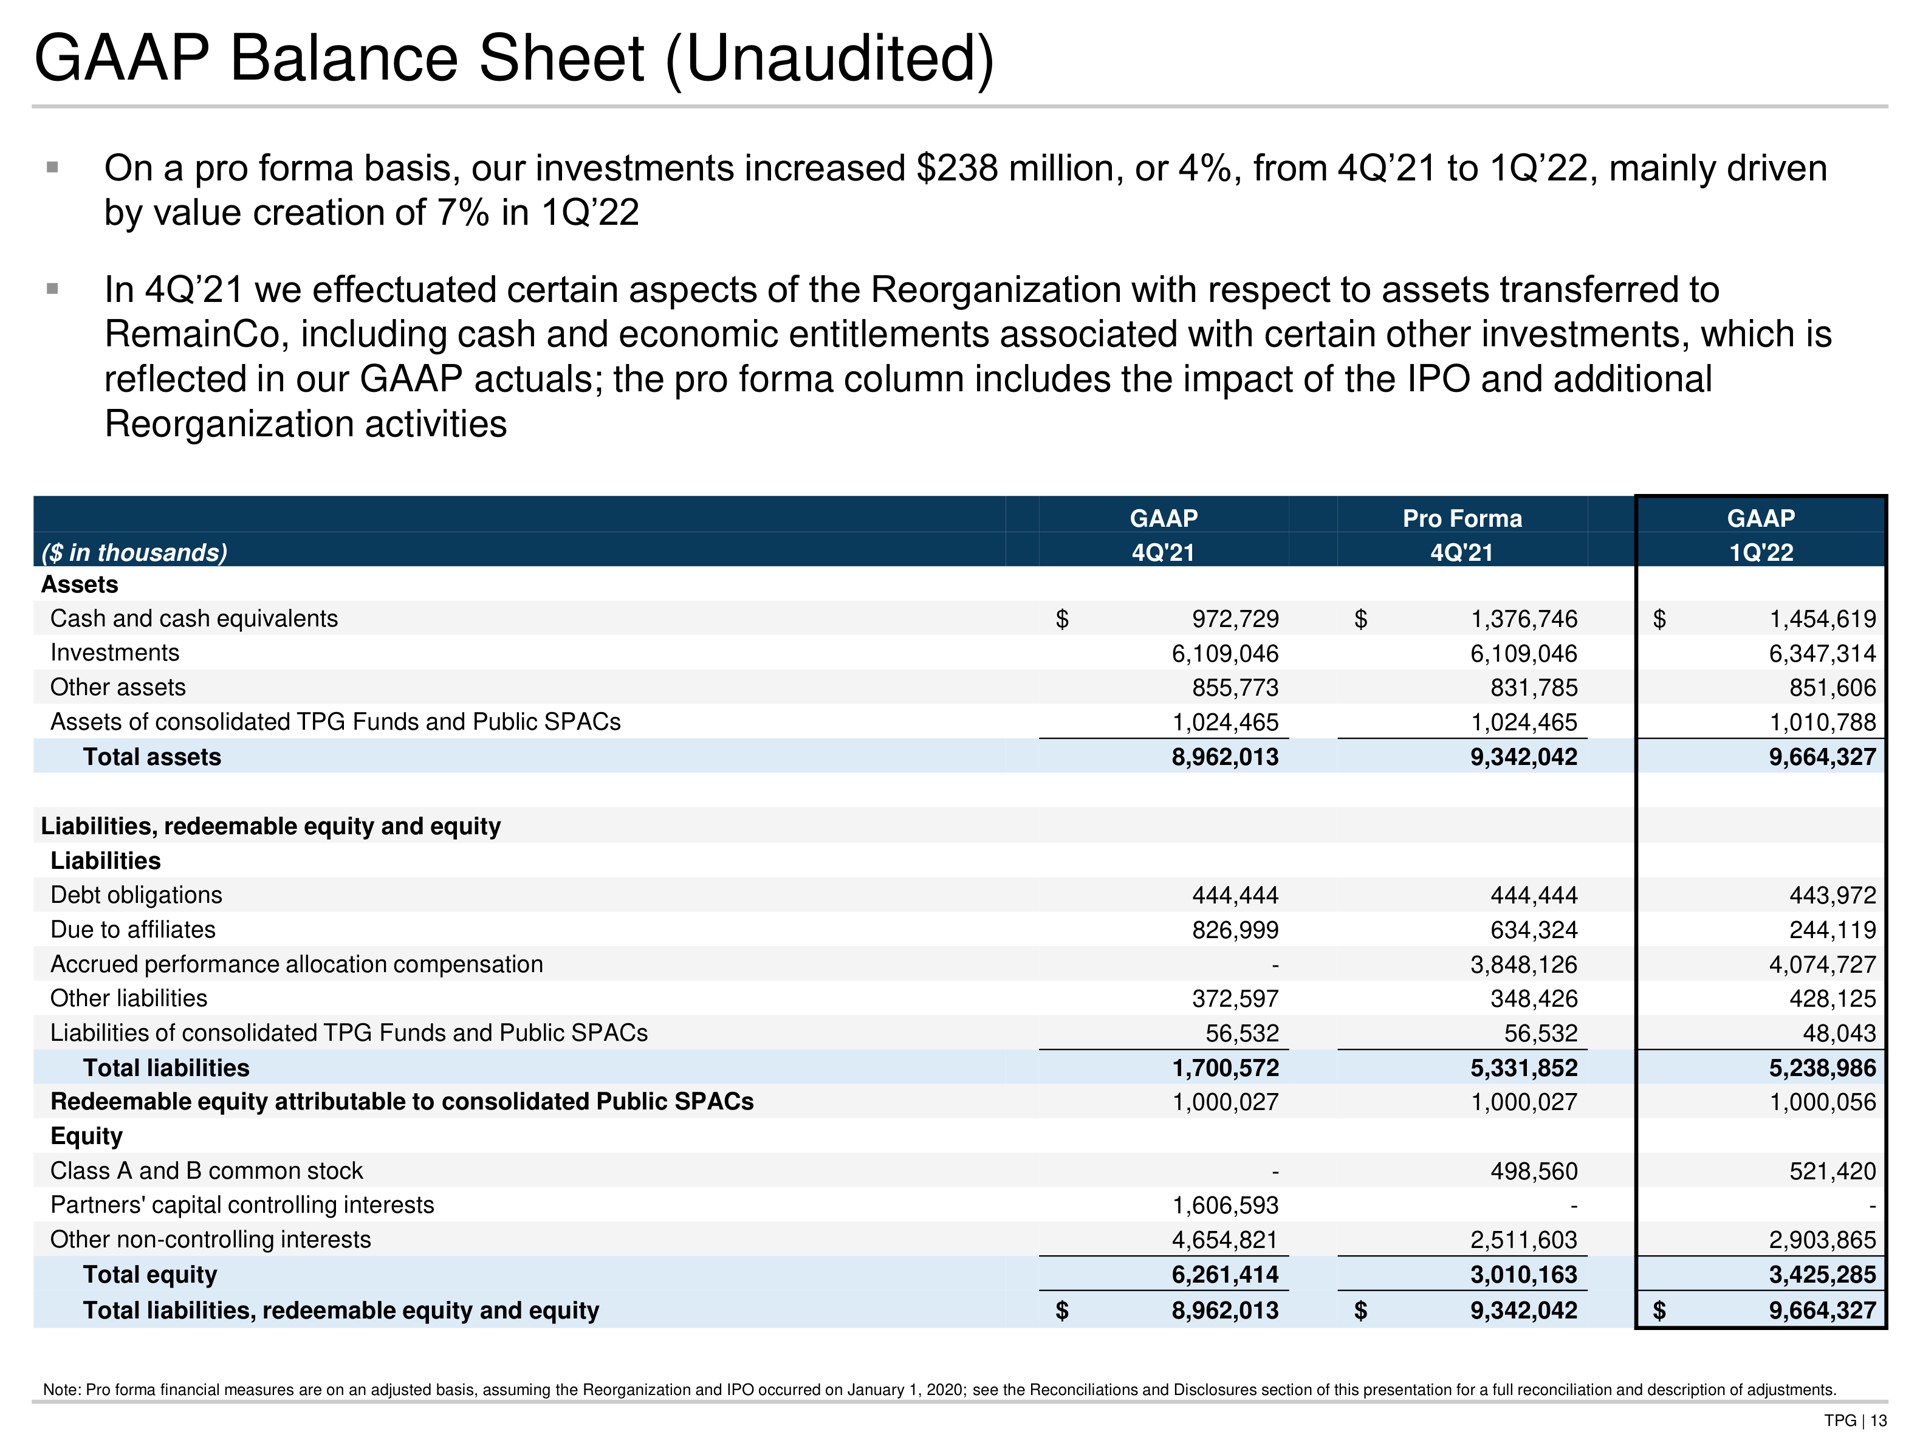 balance sheet unaudited on a pro basis our investments increased million or from to mainly driven by value creation of in in we effectuated certain aspects of the reorganization with respect to assets transferred to including cash and economic entitlements associated with certain other investments which is reflected in our the pro column includes the impact of the and additional reorganization activities ona | TPG